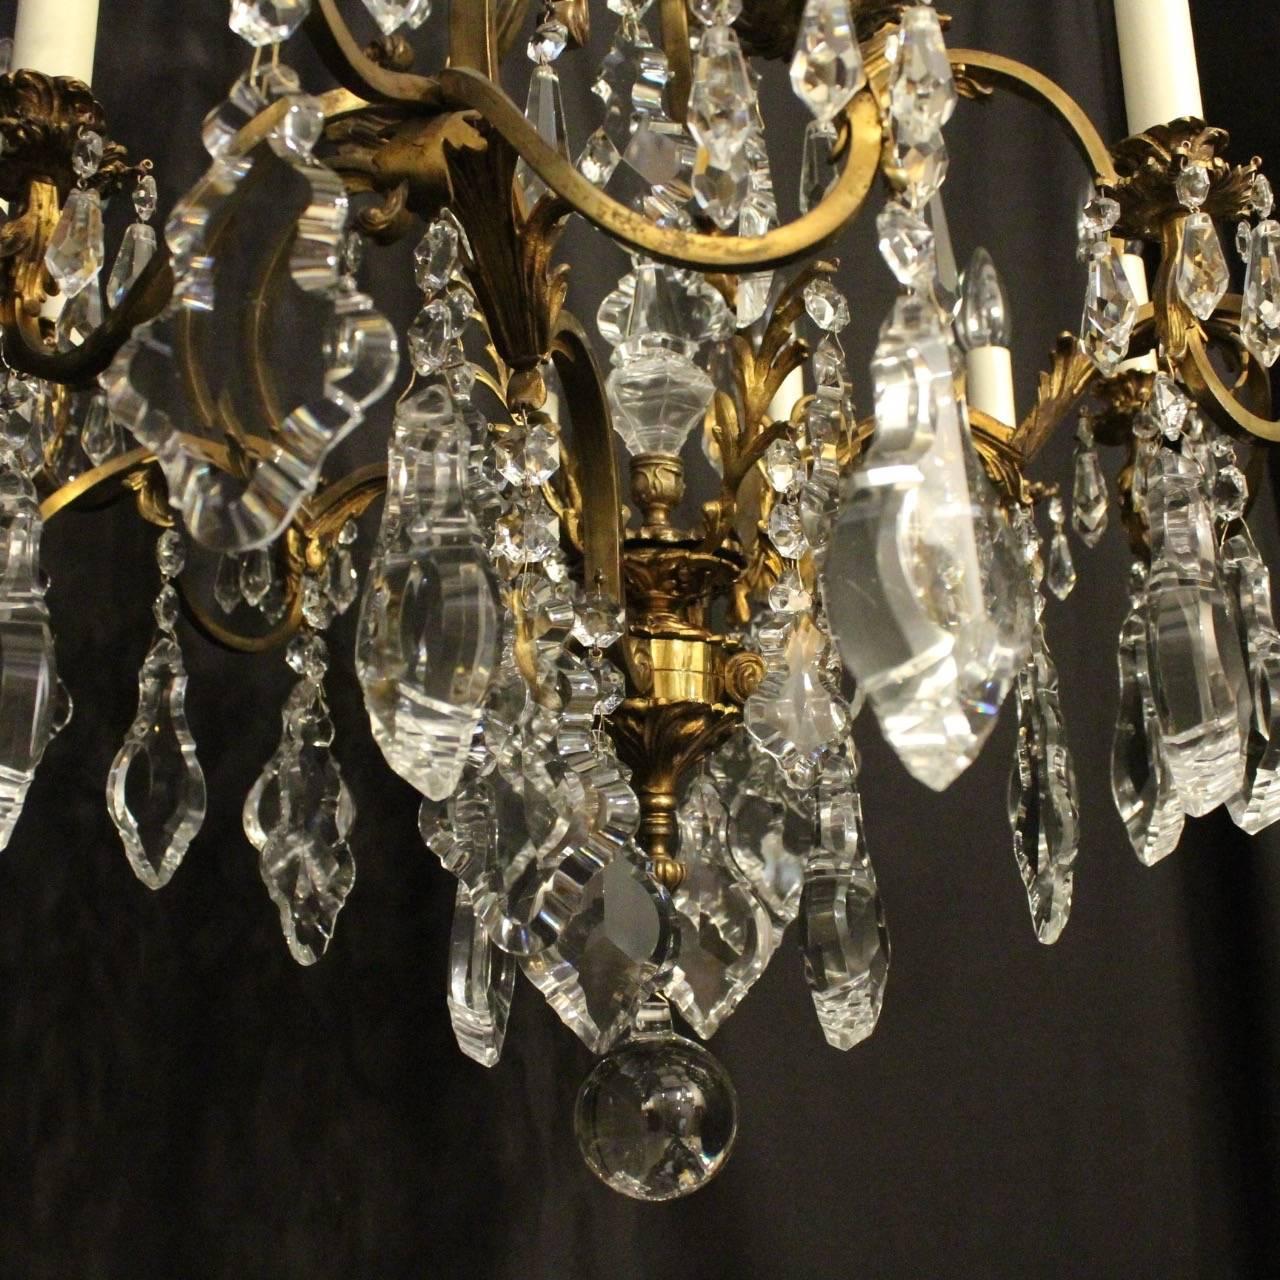 20th Century French Gilded Bronze and Crystal Twelve-Light Birdcage Antique Chandelier